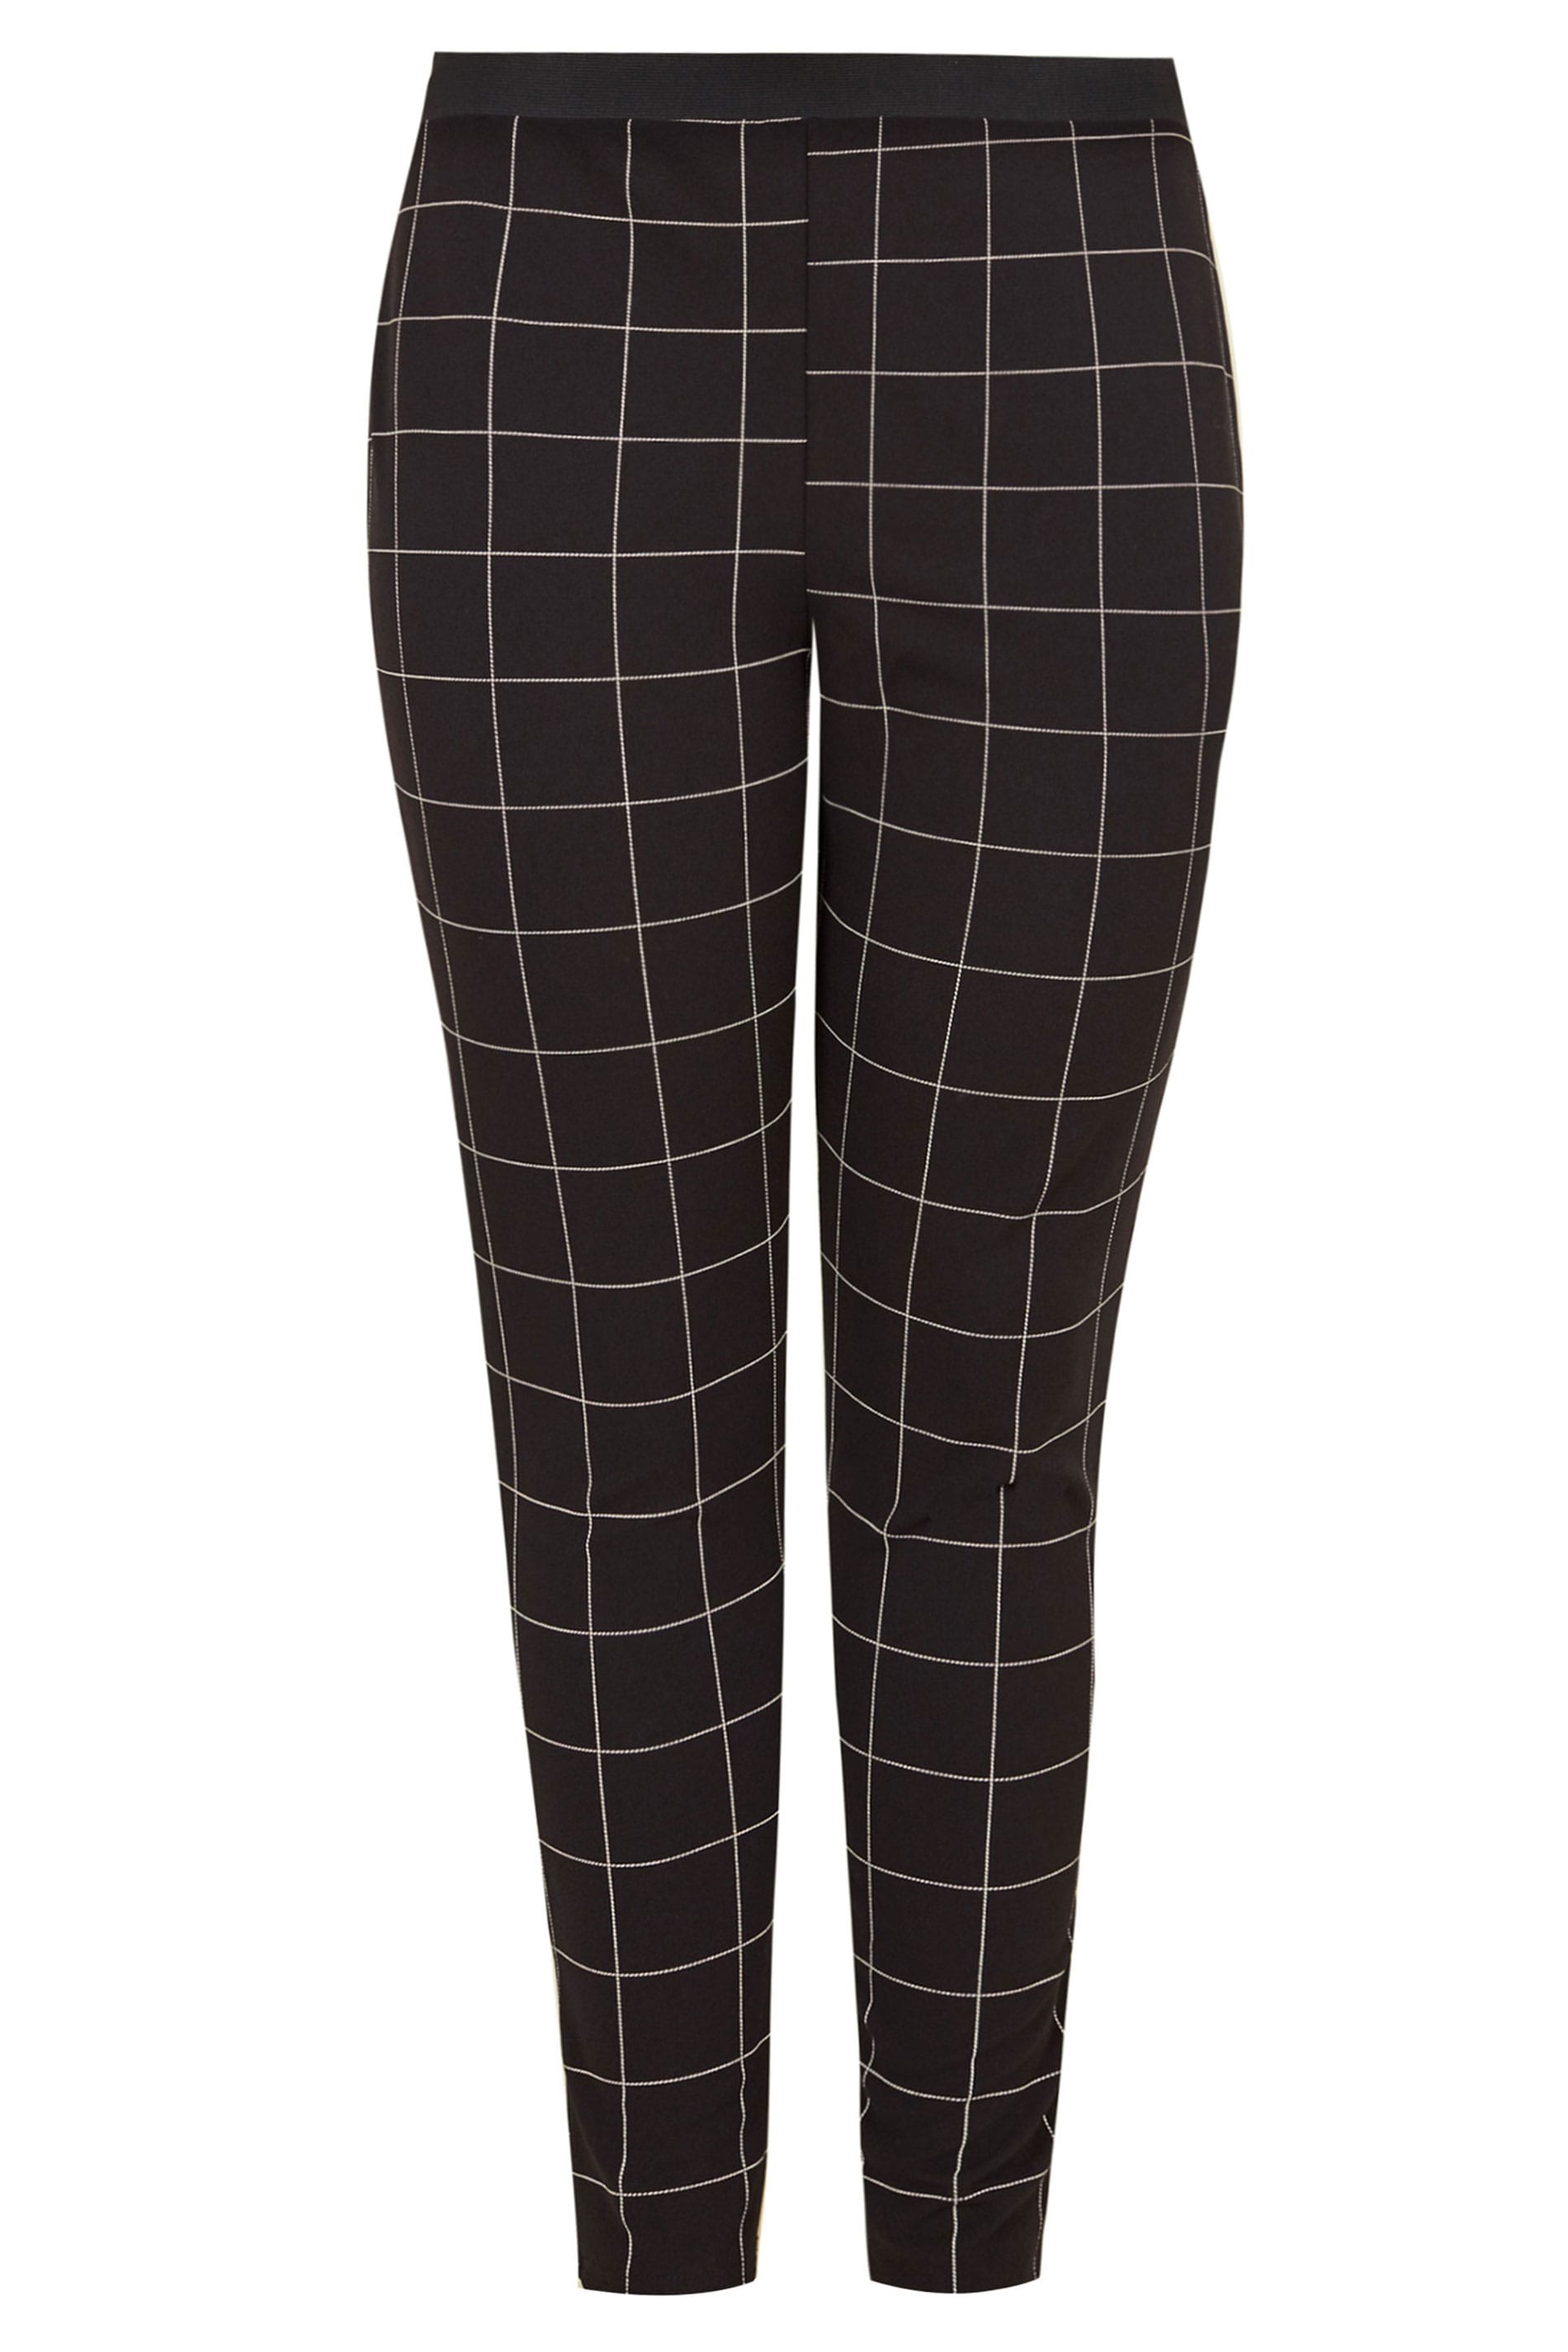 Plus Size Black & White Check Harem Trousers | Sizes 16 to 36 | Yours ...